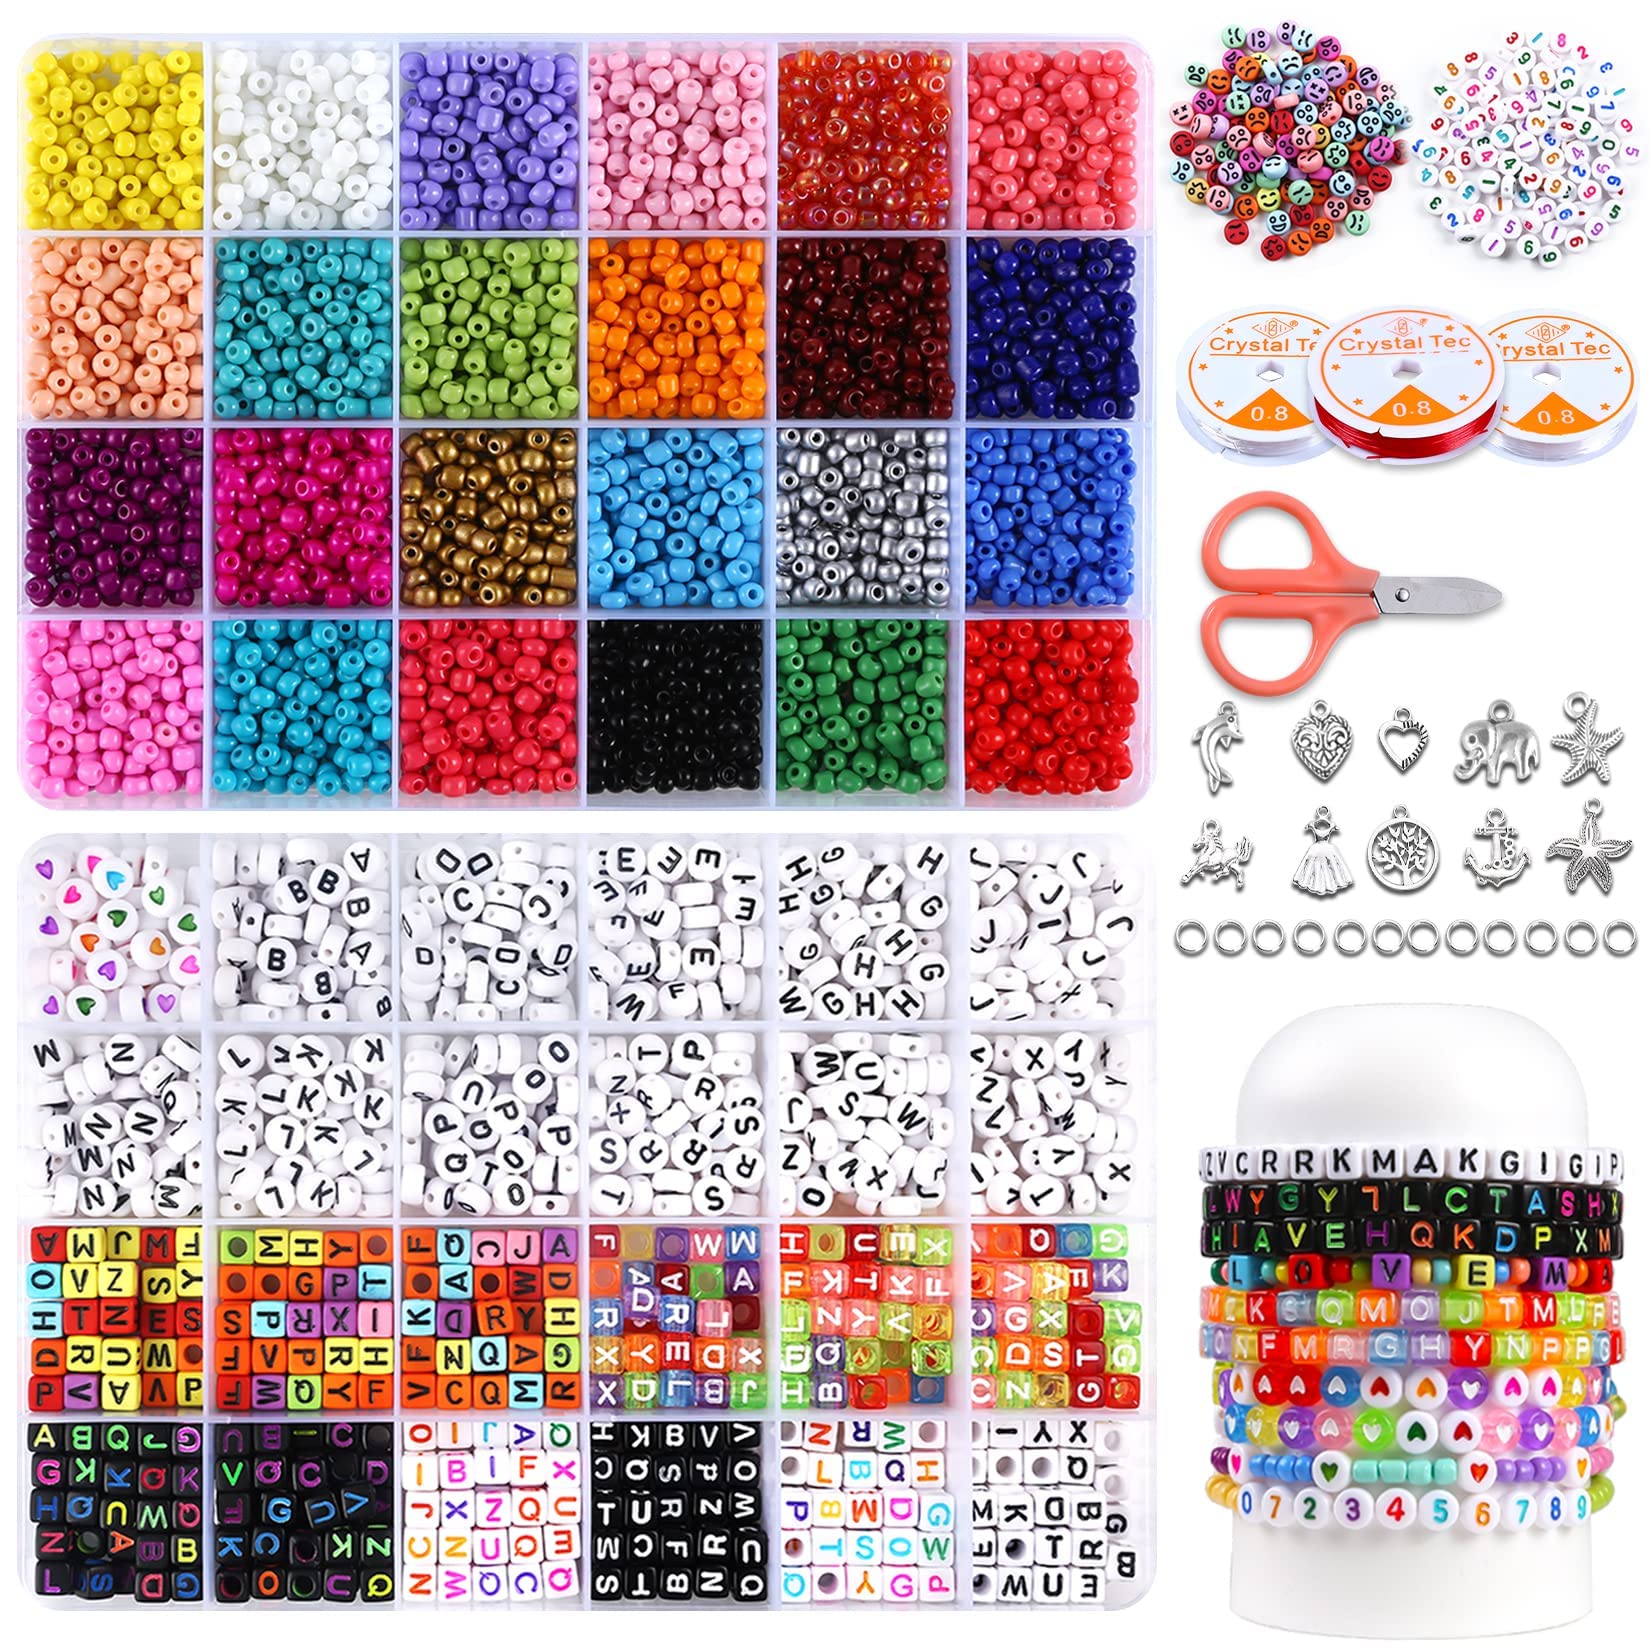 Amazon.com: 7200 Pcs Clay Beads Bracelet Making Kit, 24 Colors Flat Round  Polymer Clay Beads with Letter Beads Smiley Face Beads and Pendant Charms  for Jewelry Making, Heishi Beads for Necklace Earring